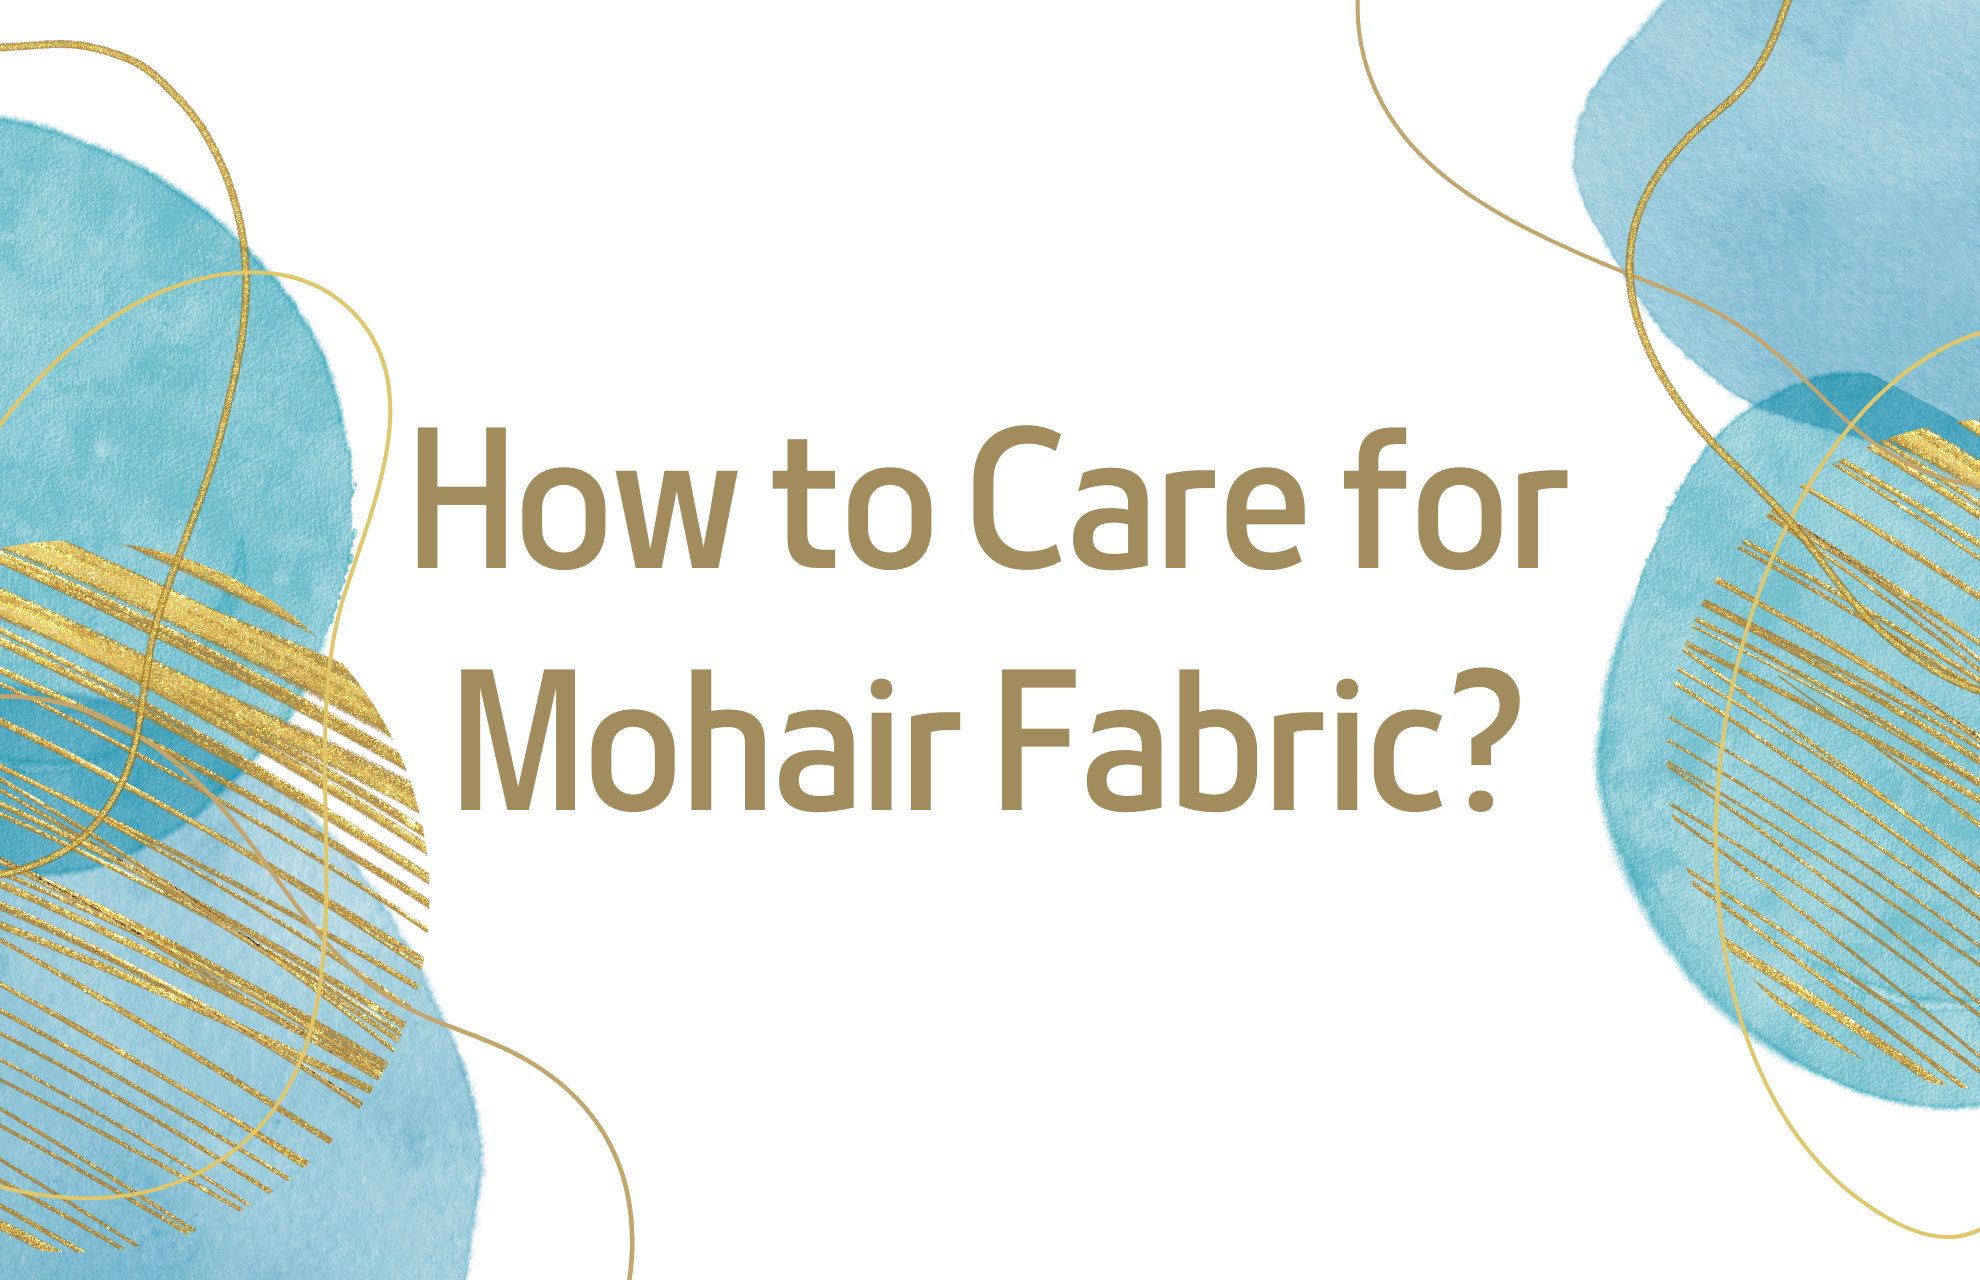 How to Care for Mohair Fabric? Mohair Care Instructions